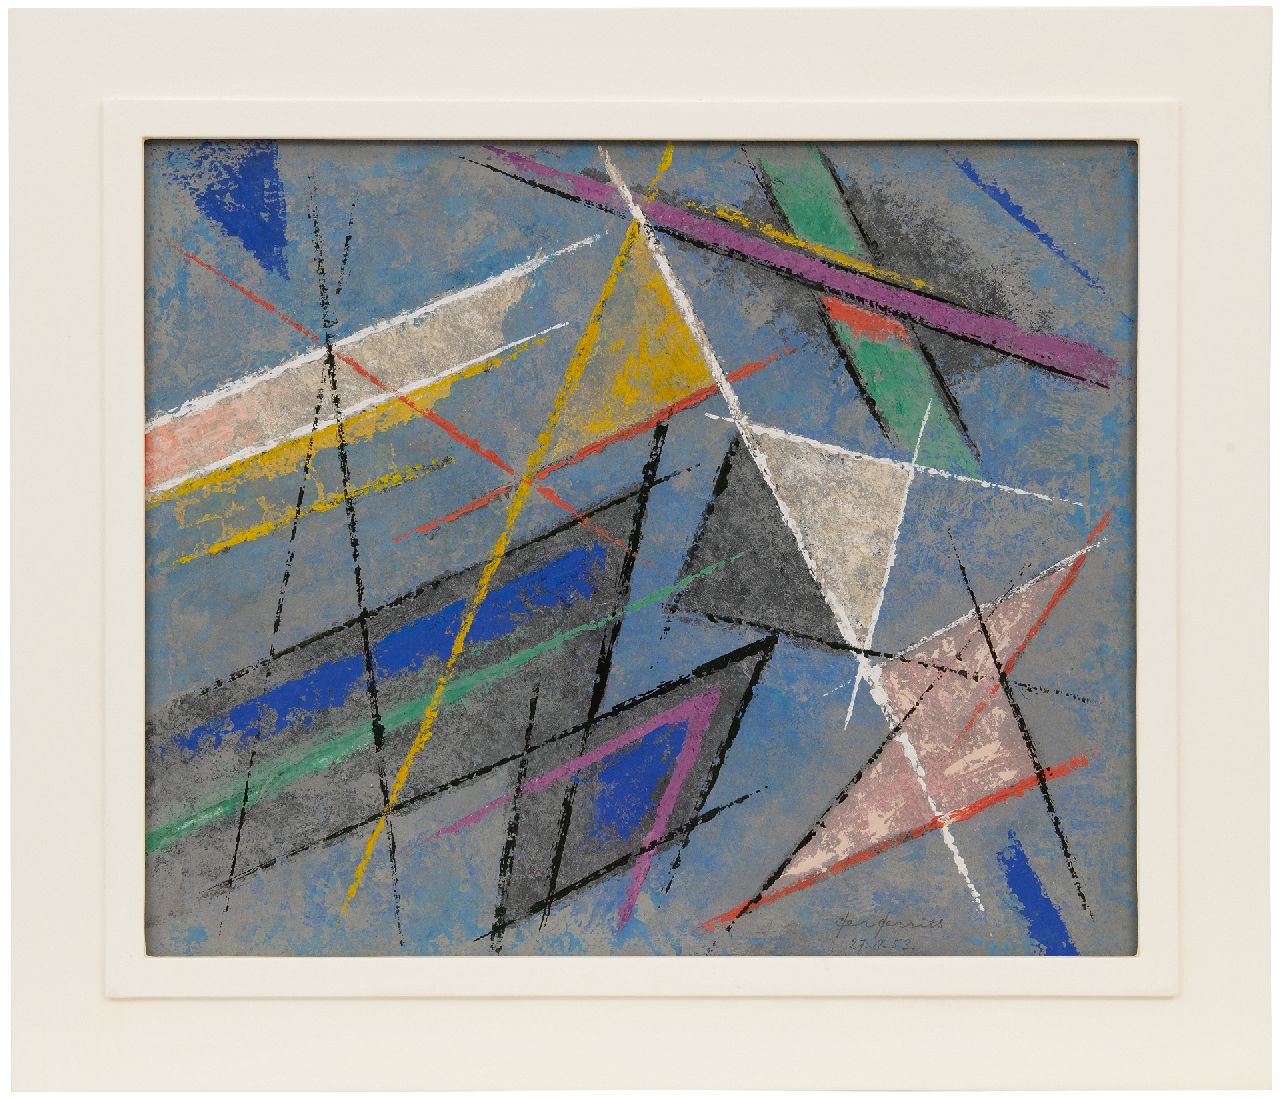 Gerrits G.J.  | Gerrit Jacobus 'Ger' Gerrits | Watercolours and drawings offered for sale | Composition with triangles, pastel and gouache on paper 42.0 x 53.0 cm, signed l.r. and dated 27.8.53.